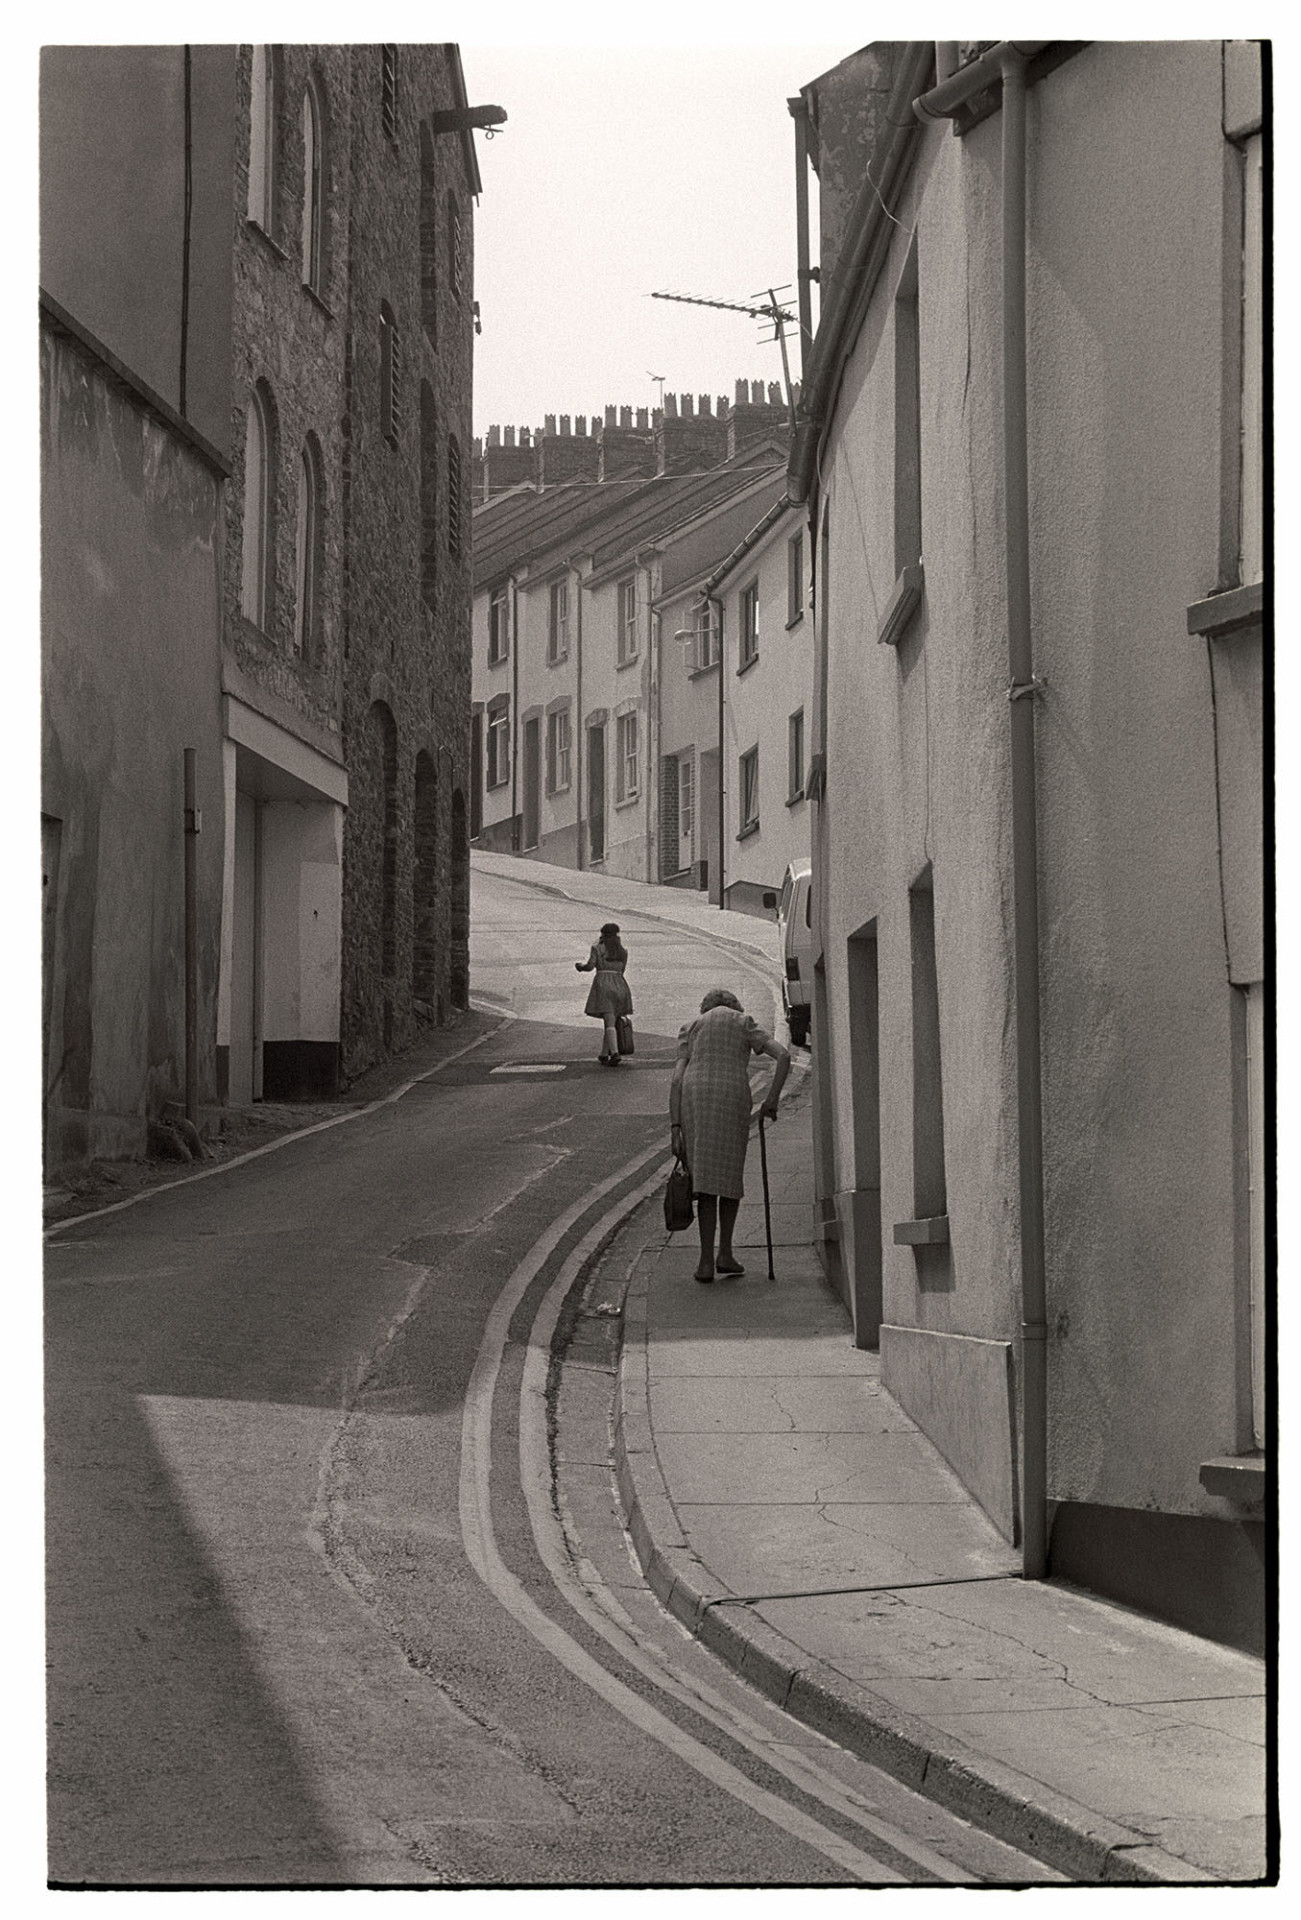 Street scene, elderly woman with stick climbing hill. 
[Two women walking up a street on a hill with a row of terraced houses at Bideford. One of the women is using a walking stick and carrying a bag.]